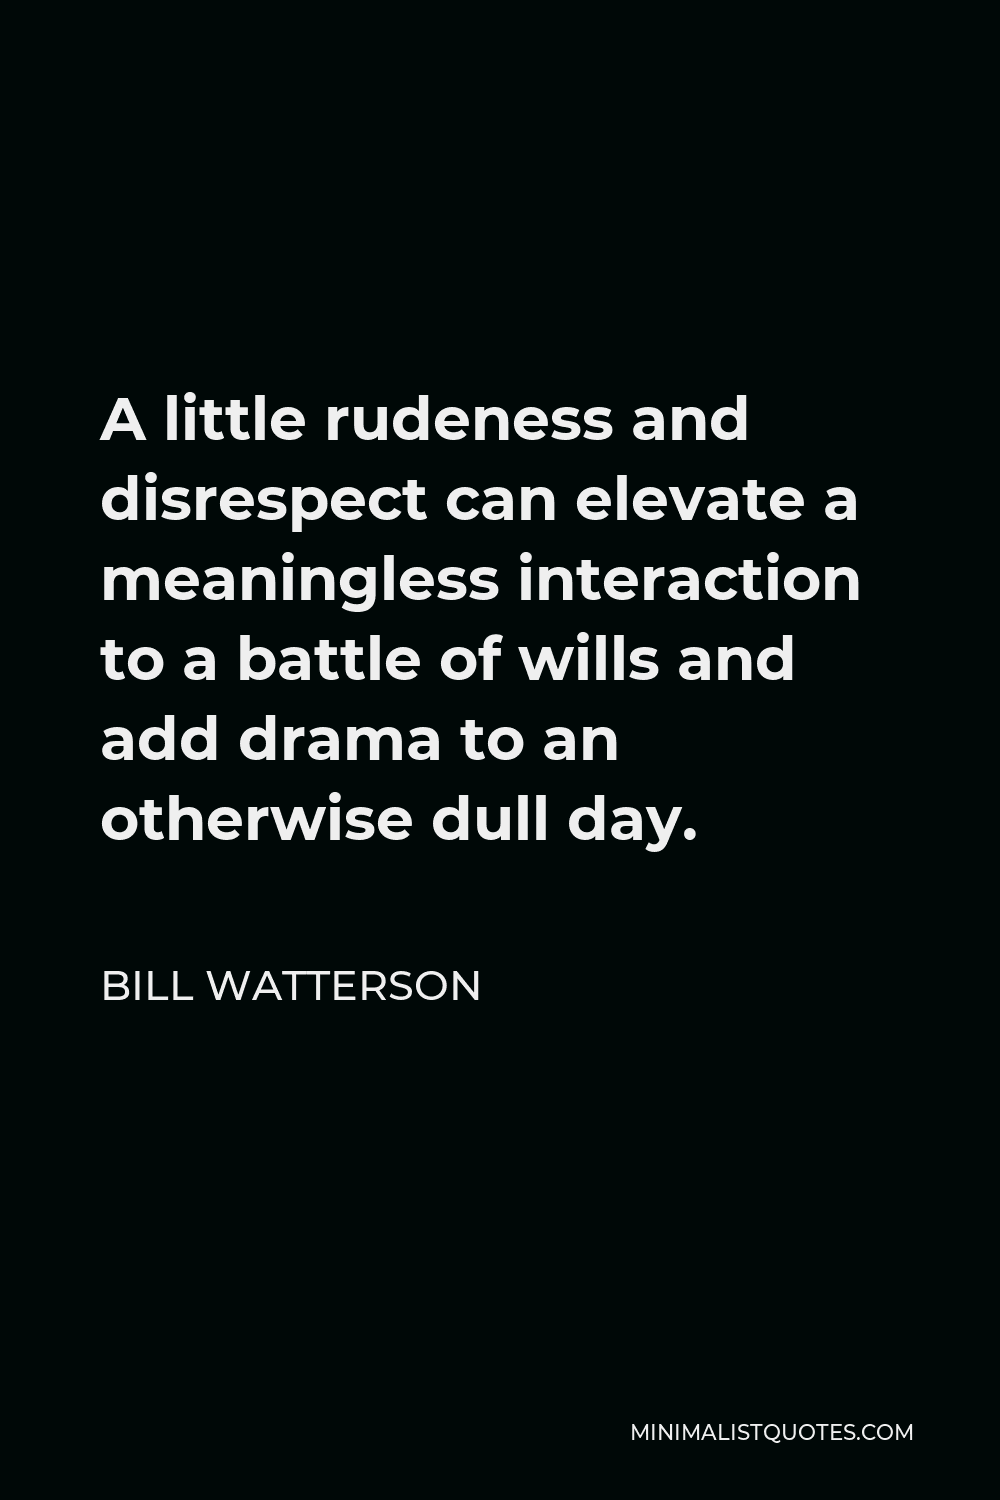 Bill Watterson Quote - A little rudeness and disrespect can elevate a meaningless interaction to a battle of wills and add drama to an otherwise dull day.